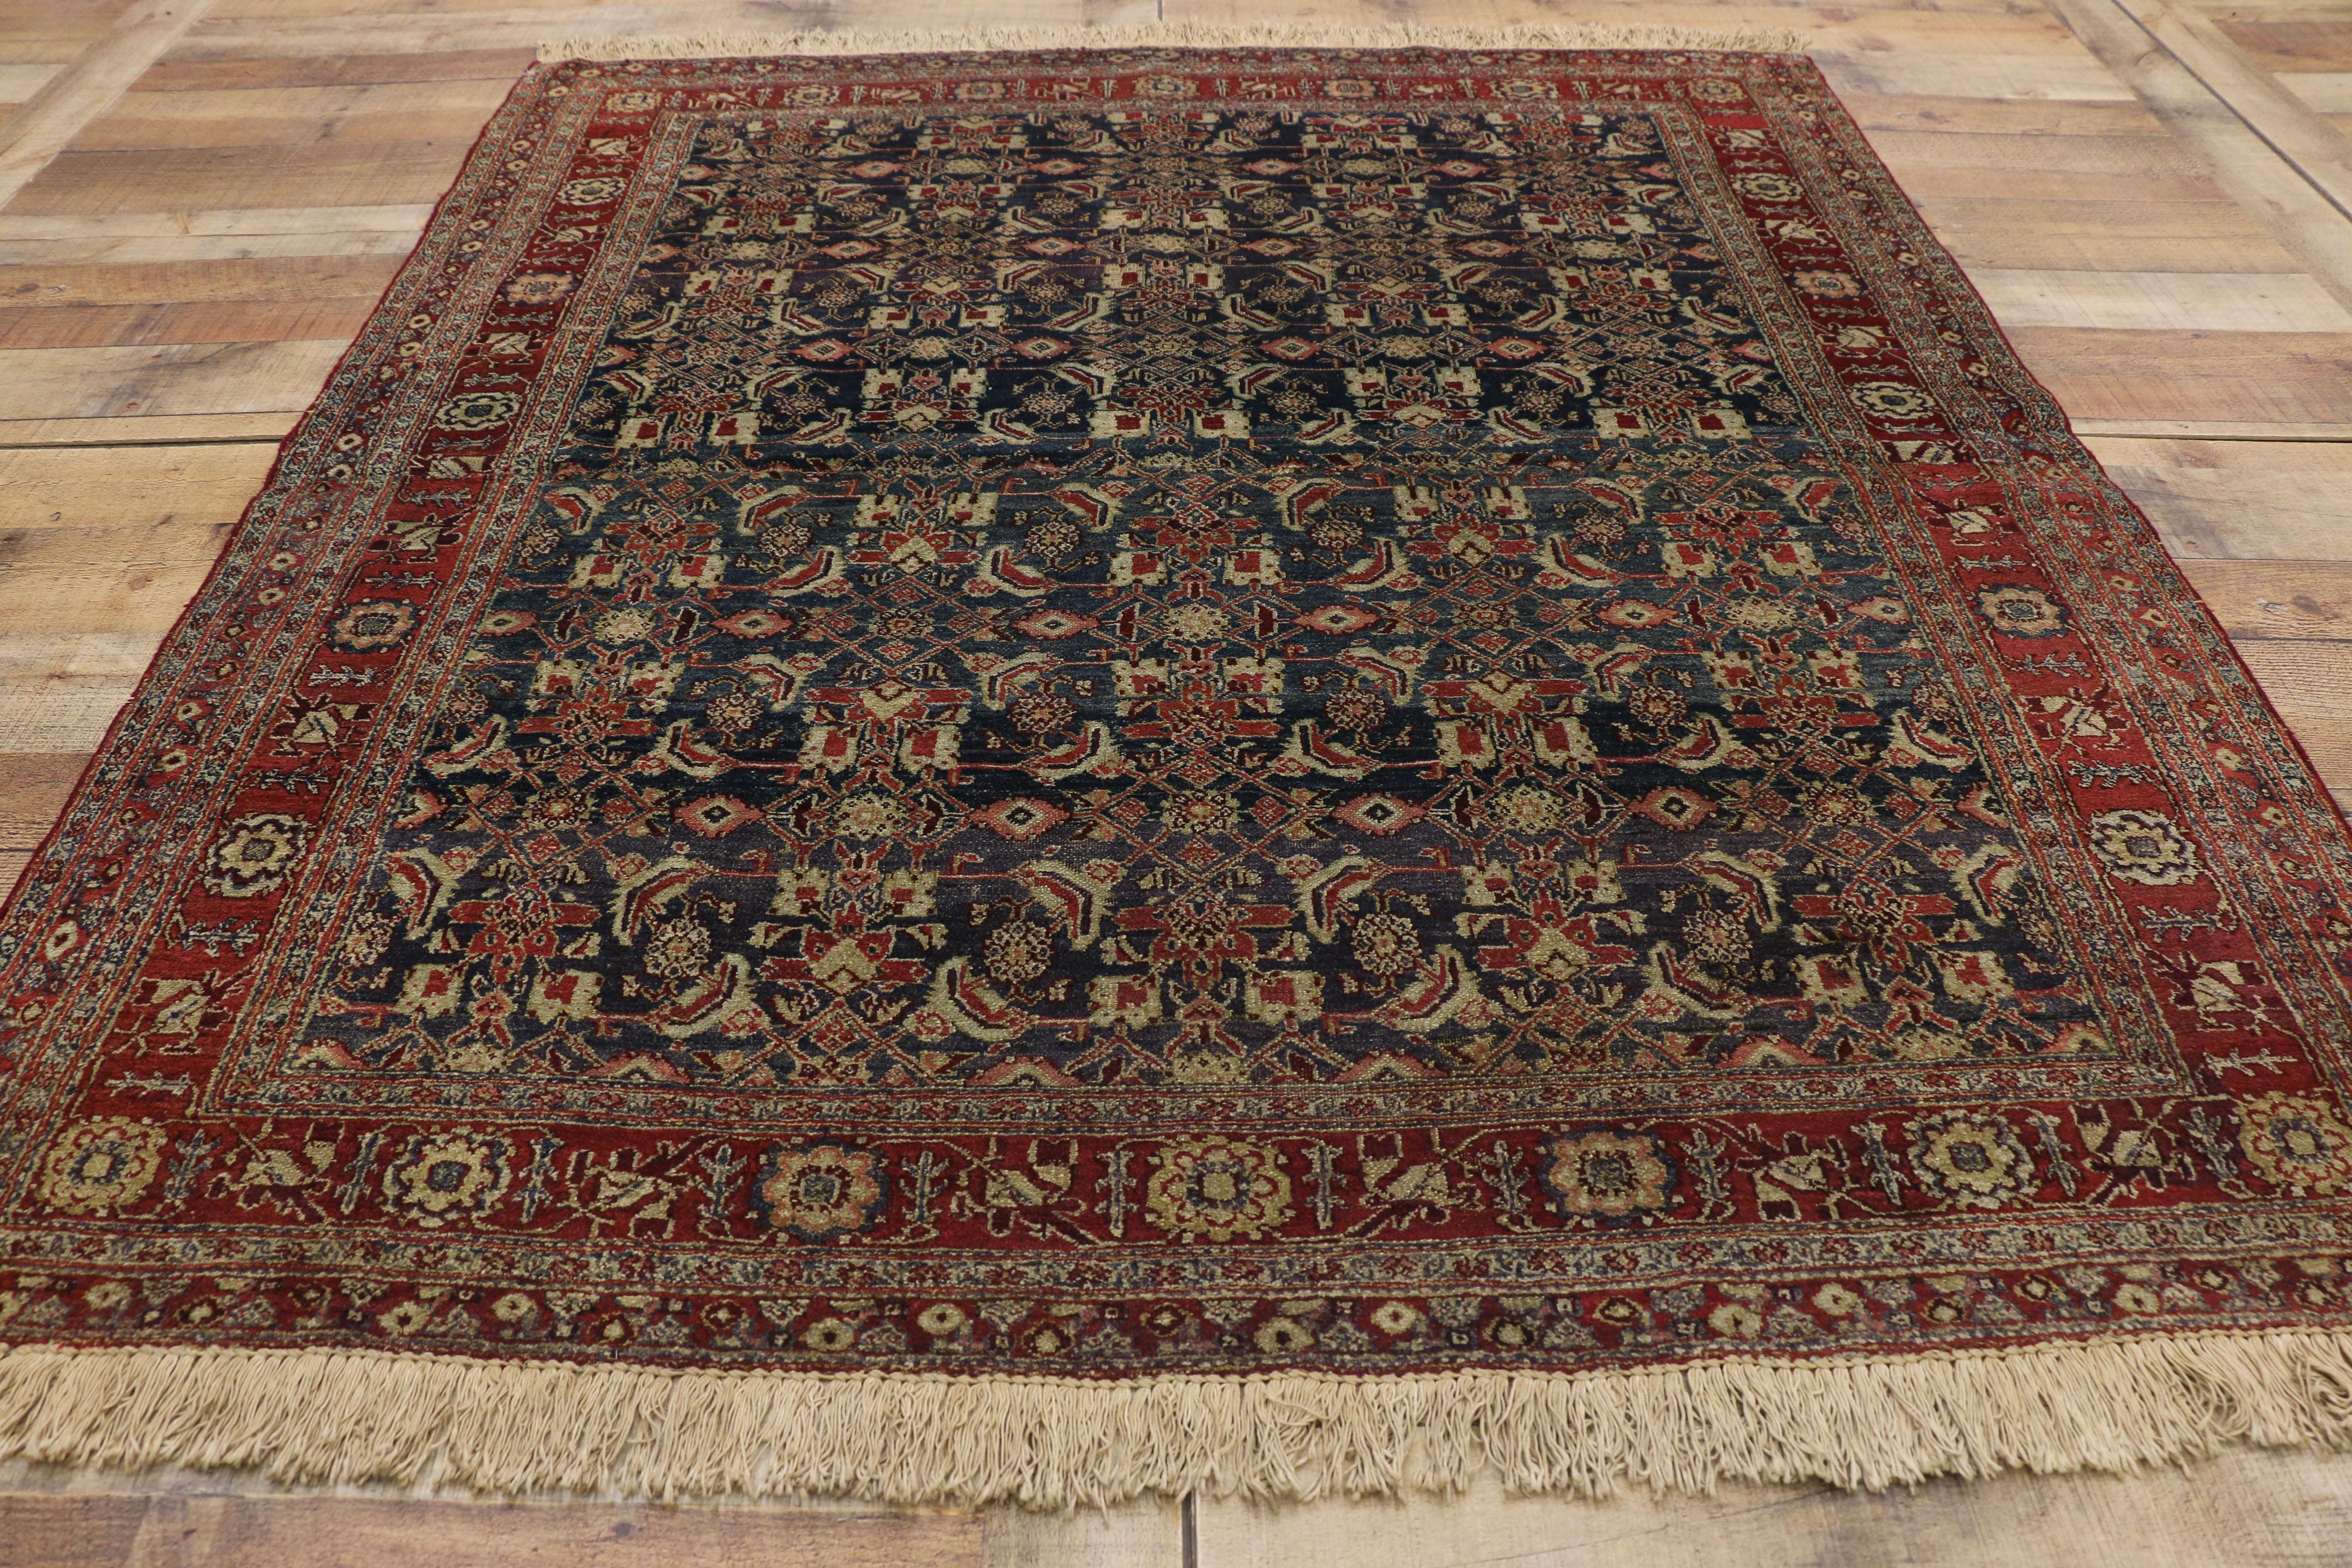 Antique Indian Area Rug with Traditional Victorian Style In Good Condition For Sale In Dallas, TX